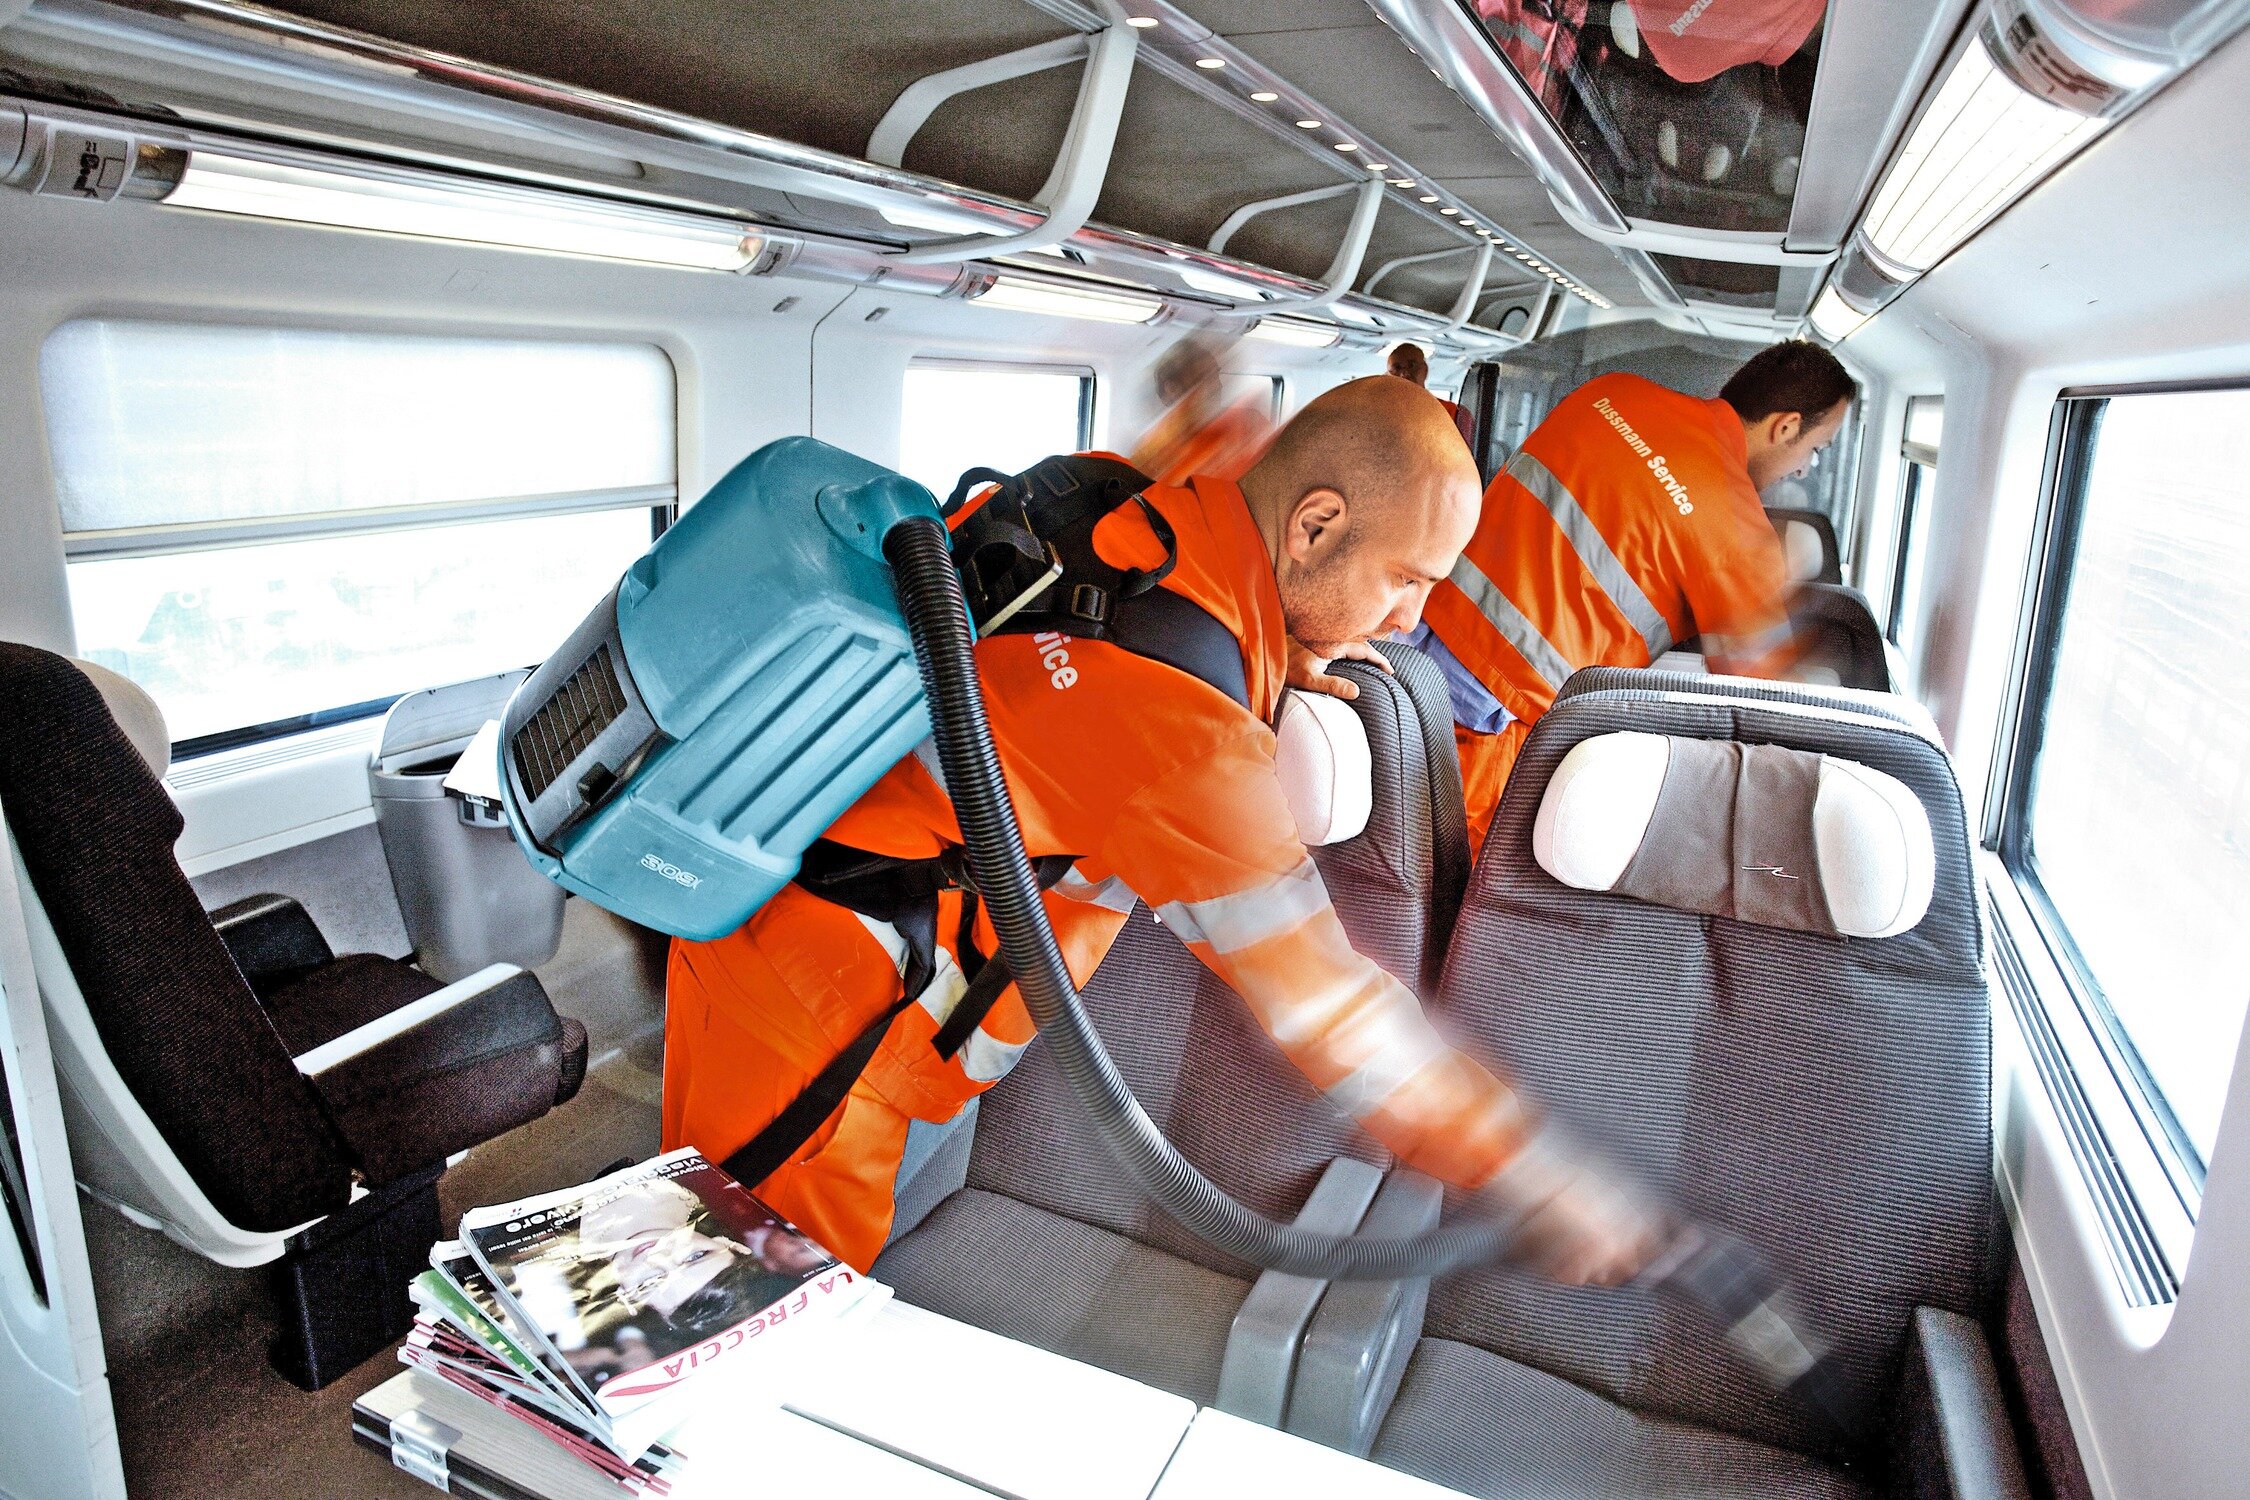 Cleaning staff clean seats in a train